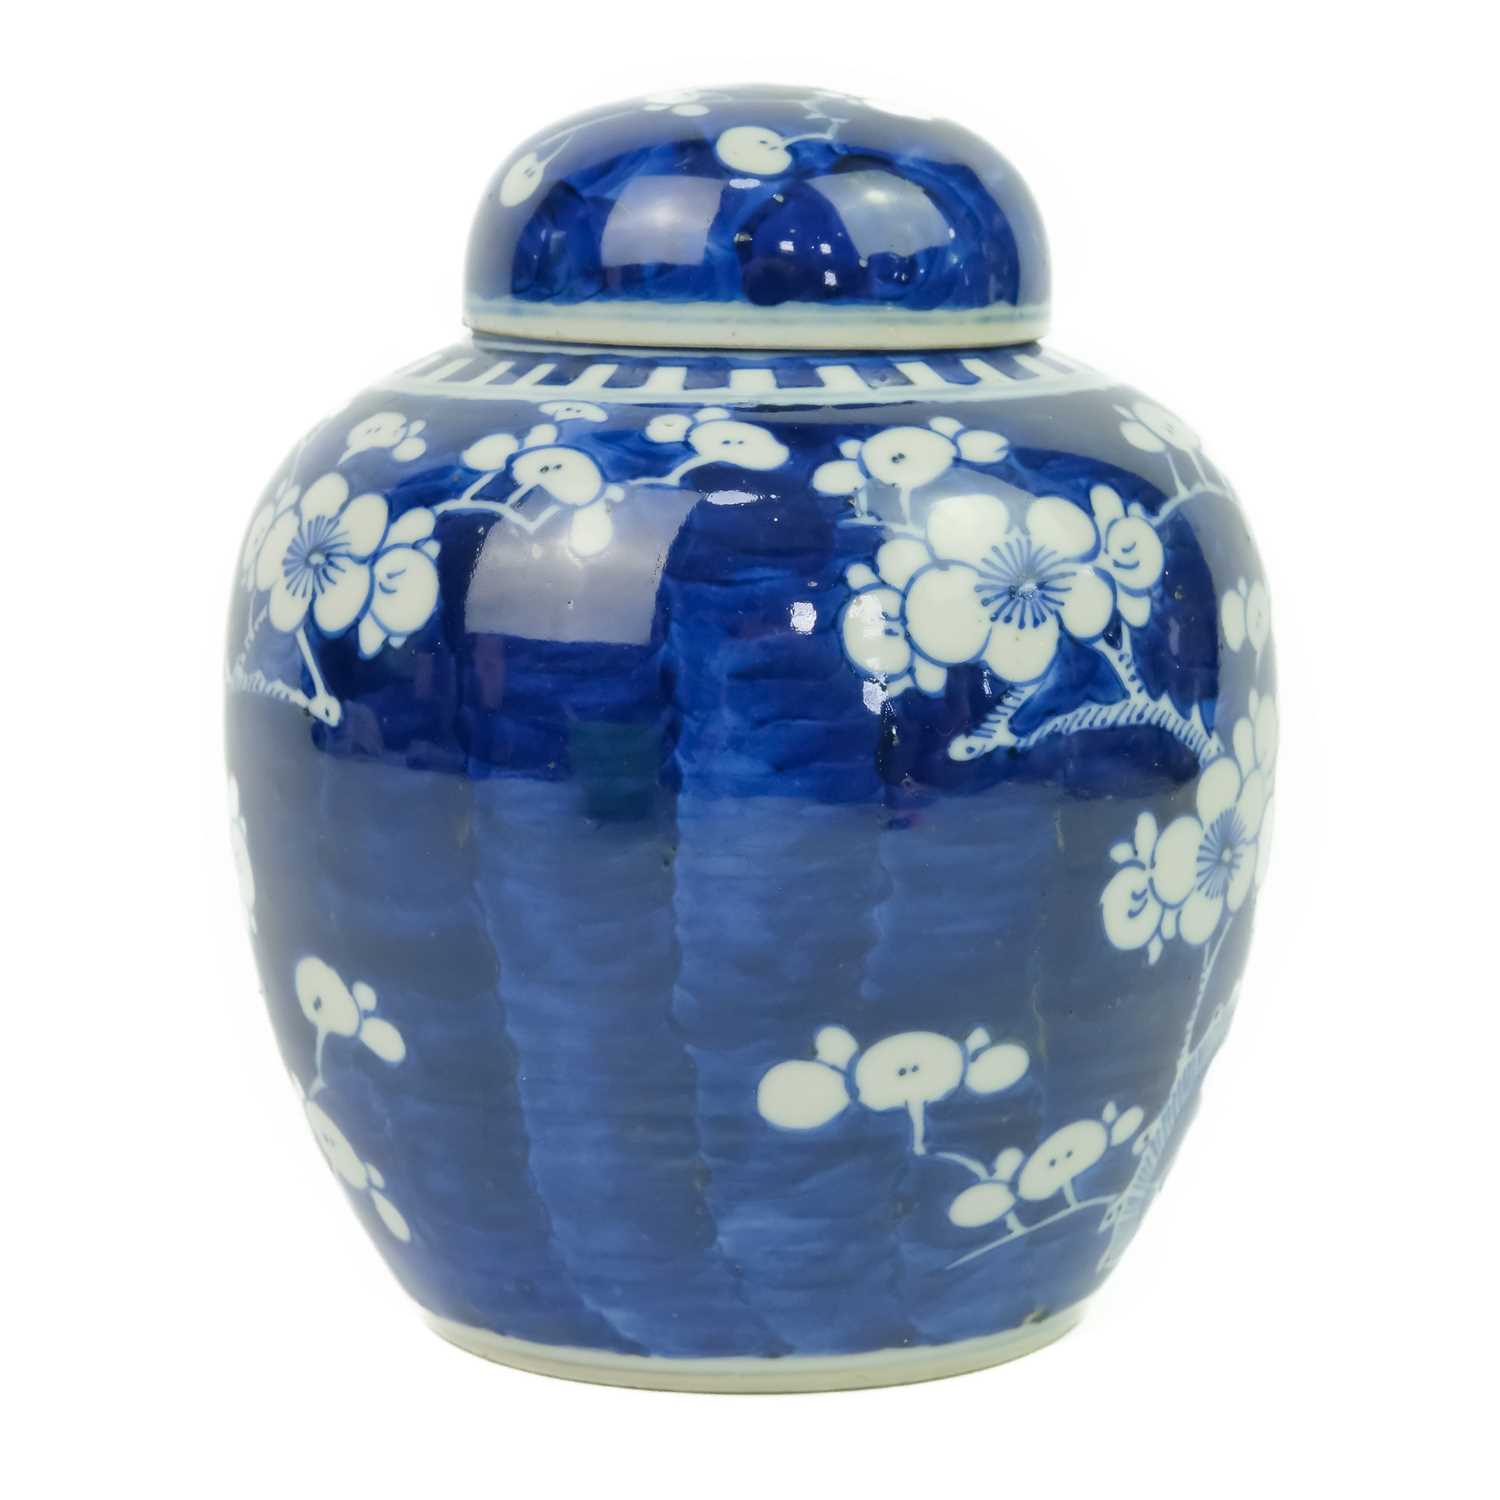 A Chinese blue & white prunus blossom pattern ginger jar & cover, circa 1900. - Image 5 of 6